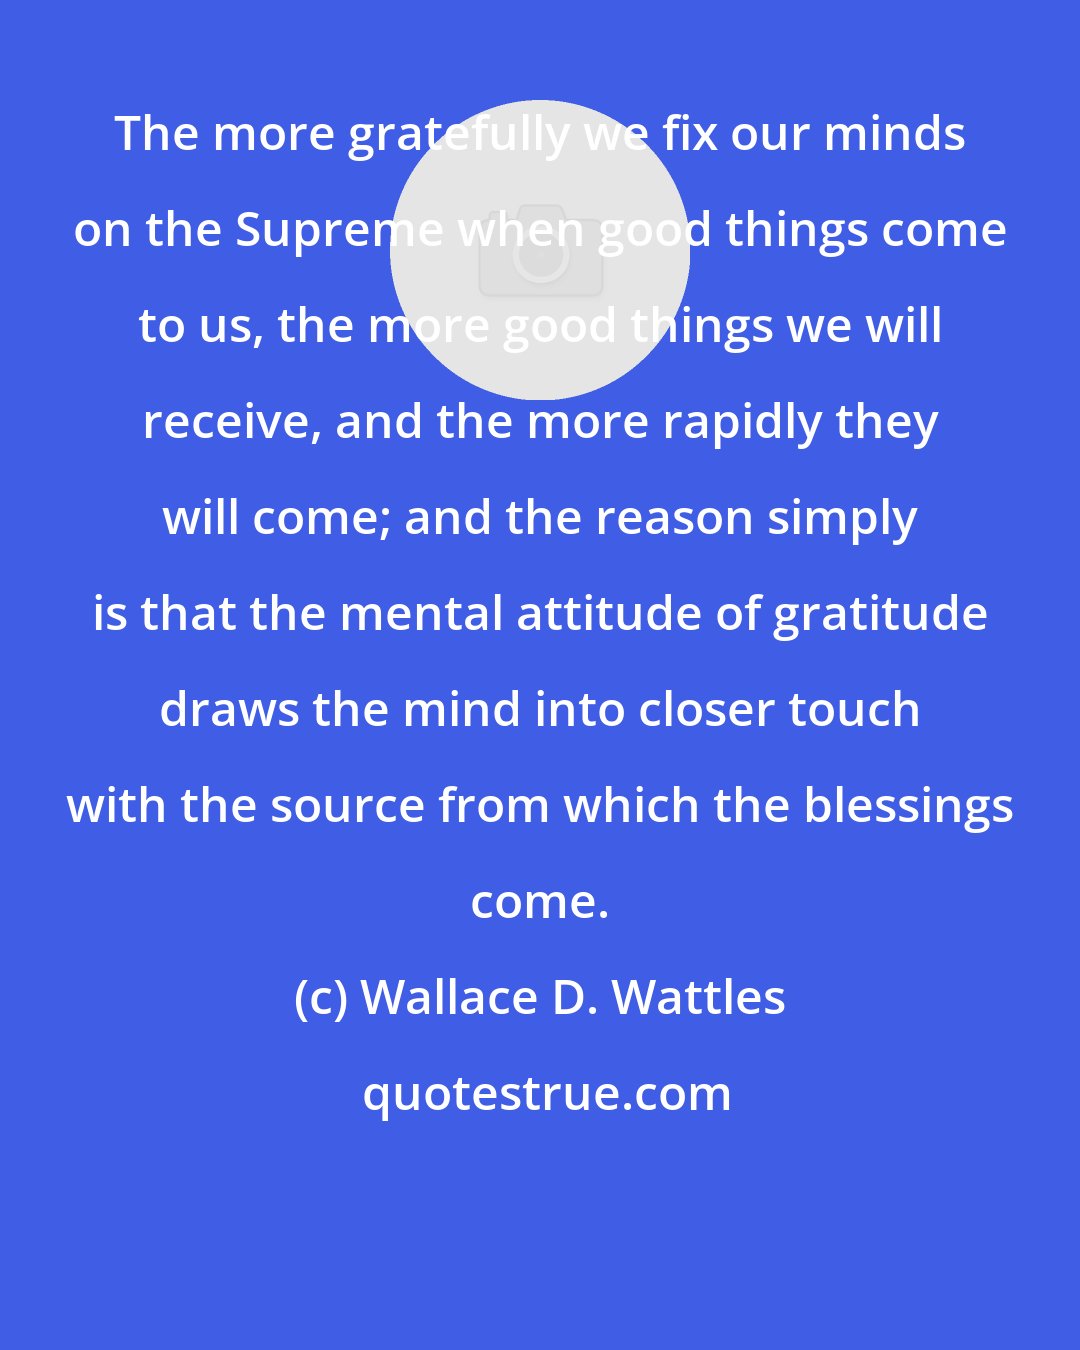 Wallace D. Wattles: The more gratefully we fix our minds on the Supreme when good things come to us, the more good things we will receive, and the more rapidly they will come; and the reason simply is that the mental attitude of gratitude draws the mind into closer touch with the source from which the blessings come.